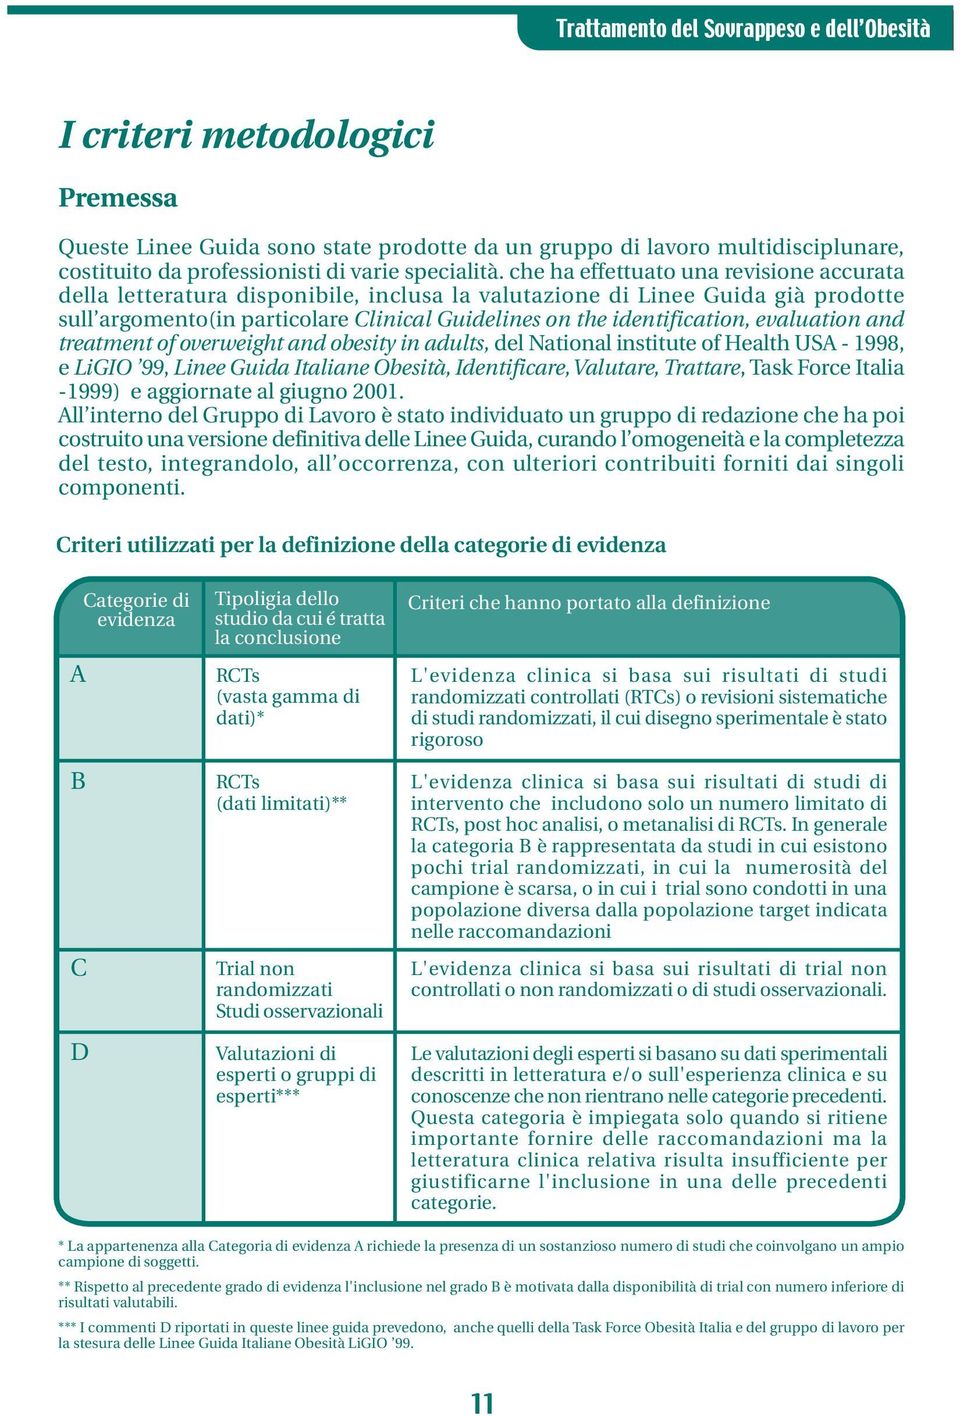 evaluation and treatment of overweight and obesity in adults, del National institute of Health USA - 1998, e LiGIO 99, Linee Guida Italiane Obesità, Identificare, Valutare, Trattare, Task Force